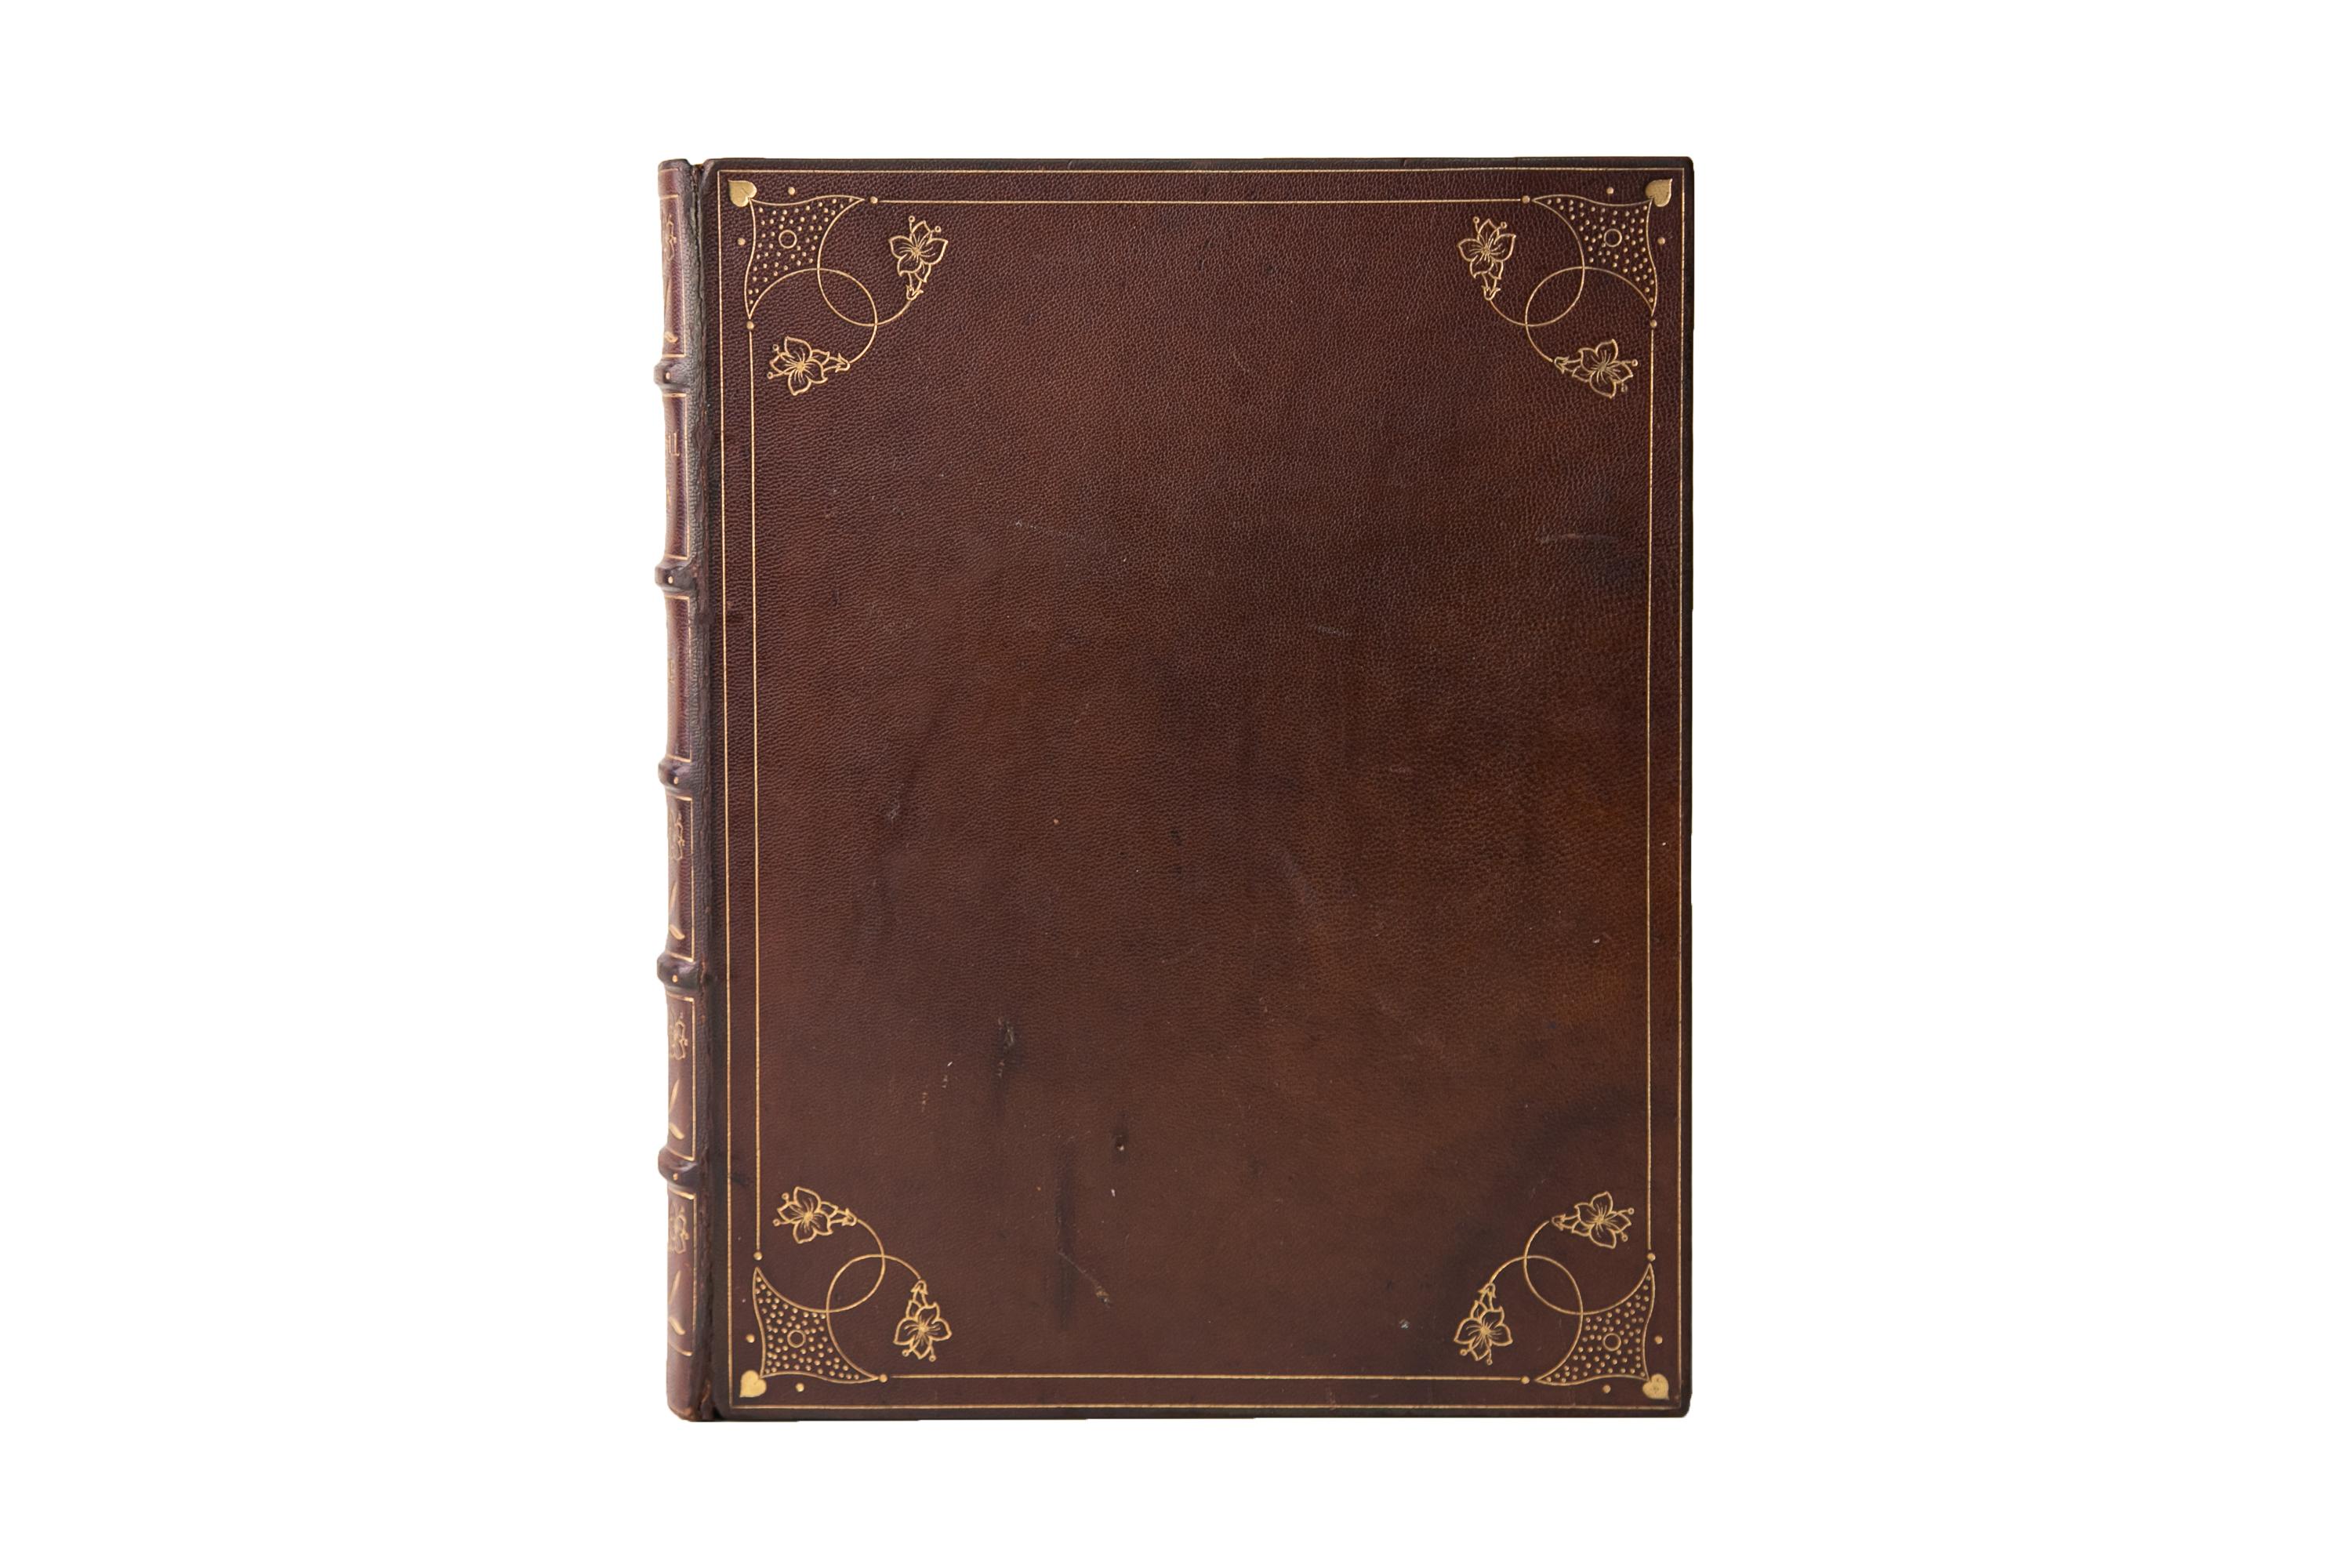 1 Volume. Mrs. Steuart Erskine, Beautiful Women in History and Art. Bound in full brown morocco with boards displaying gilt corner and border detailing Raised bands with panels displaying floral detailing and label lettering in gilt. The top edge is